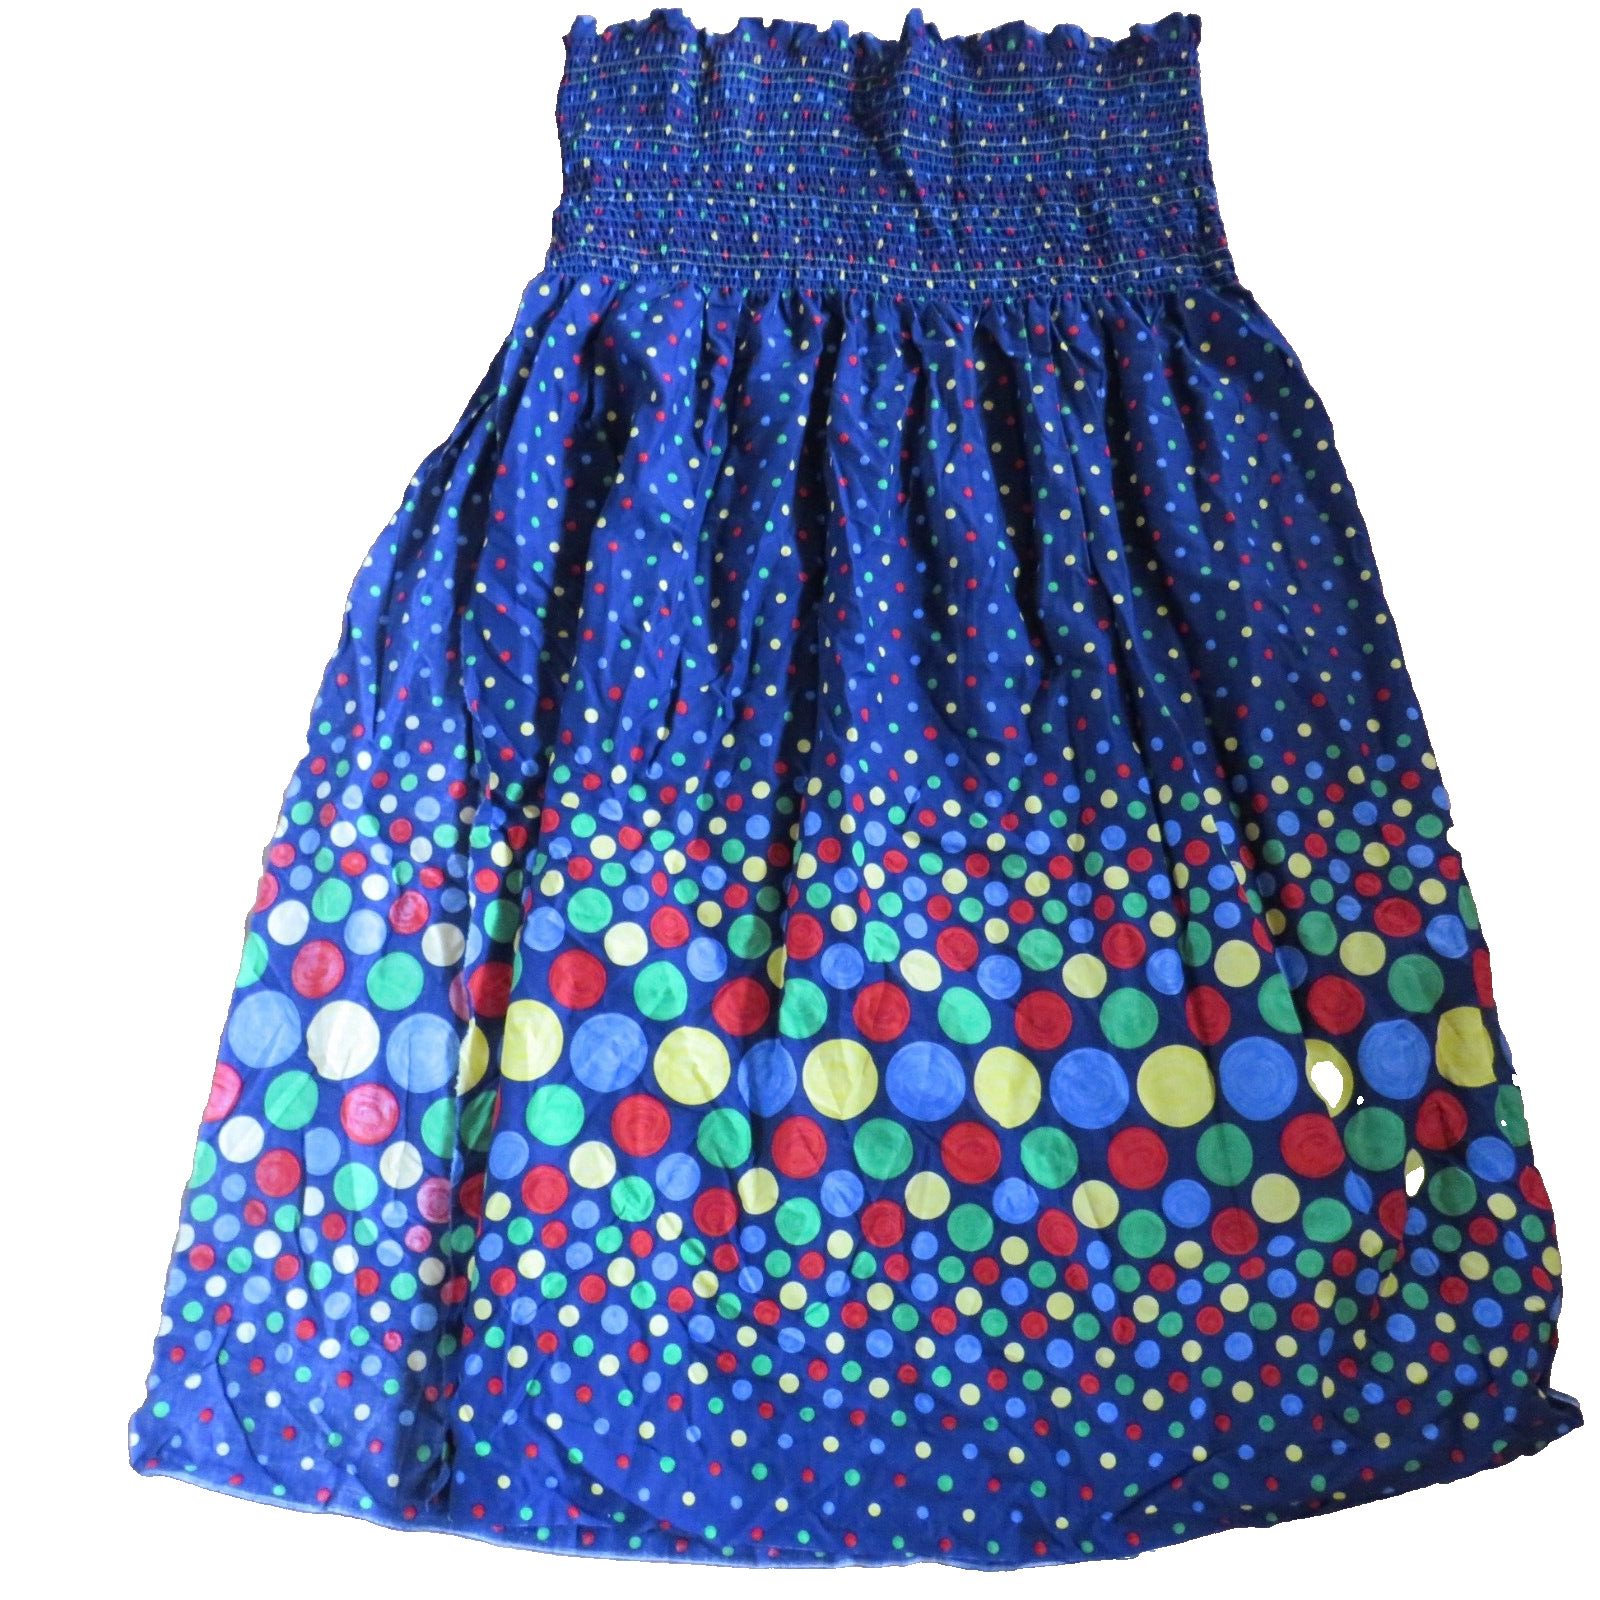 Vintage 70's 80's Make Your Own Dress Skirt Shirred Fabric Polka Dots on Blue